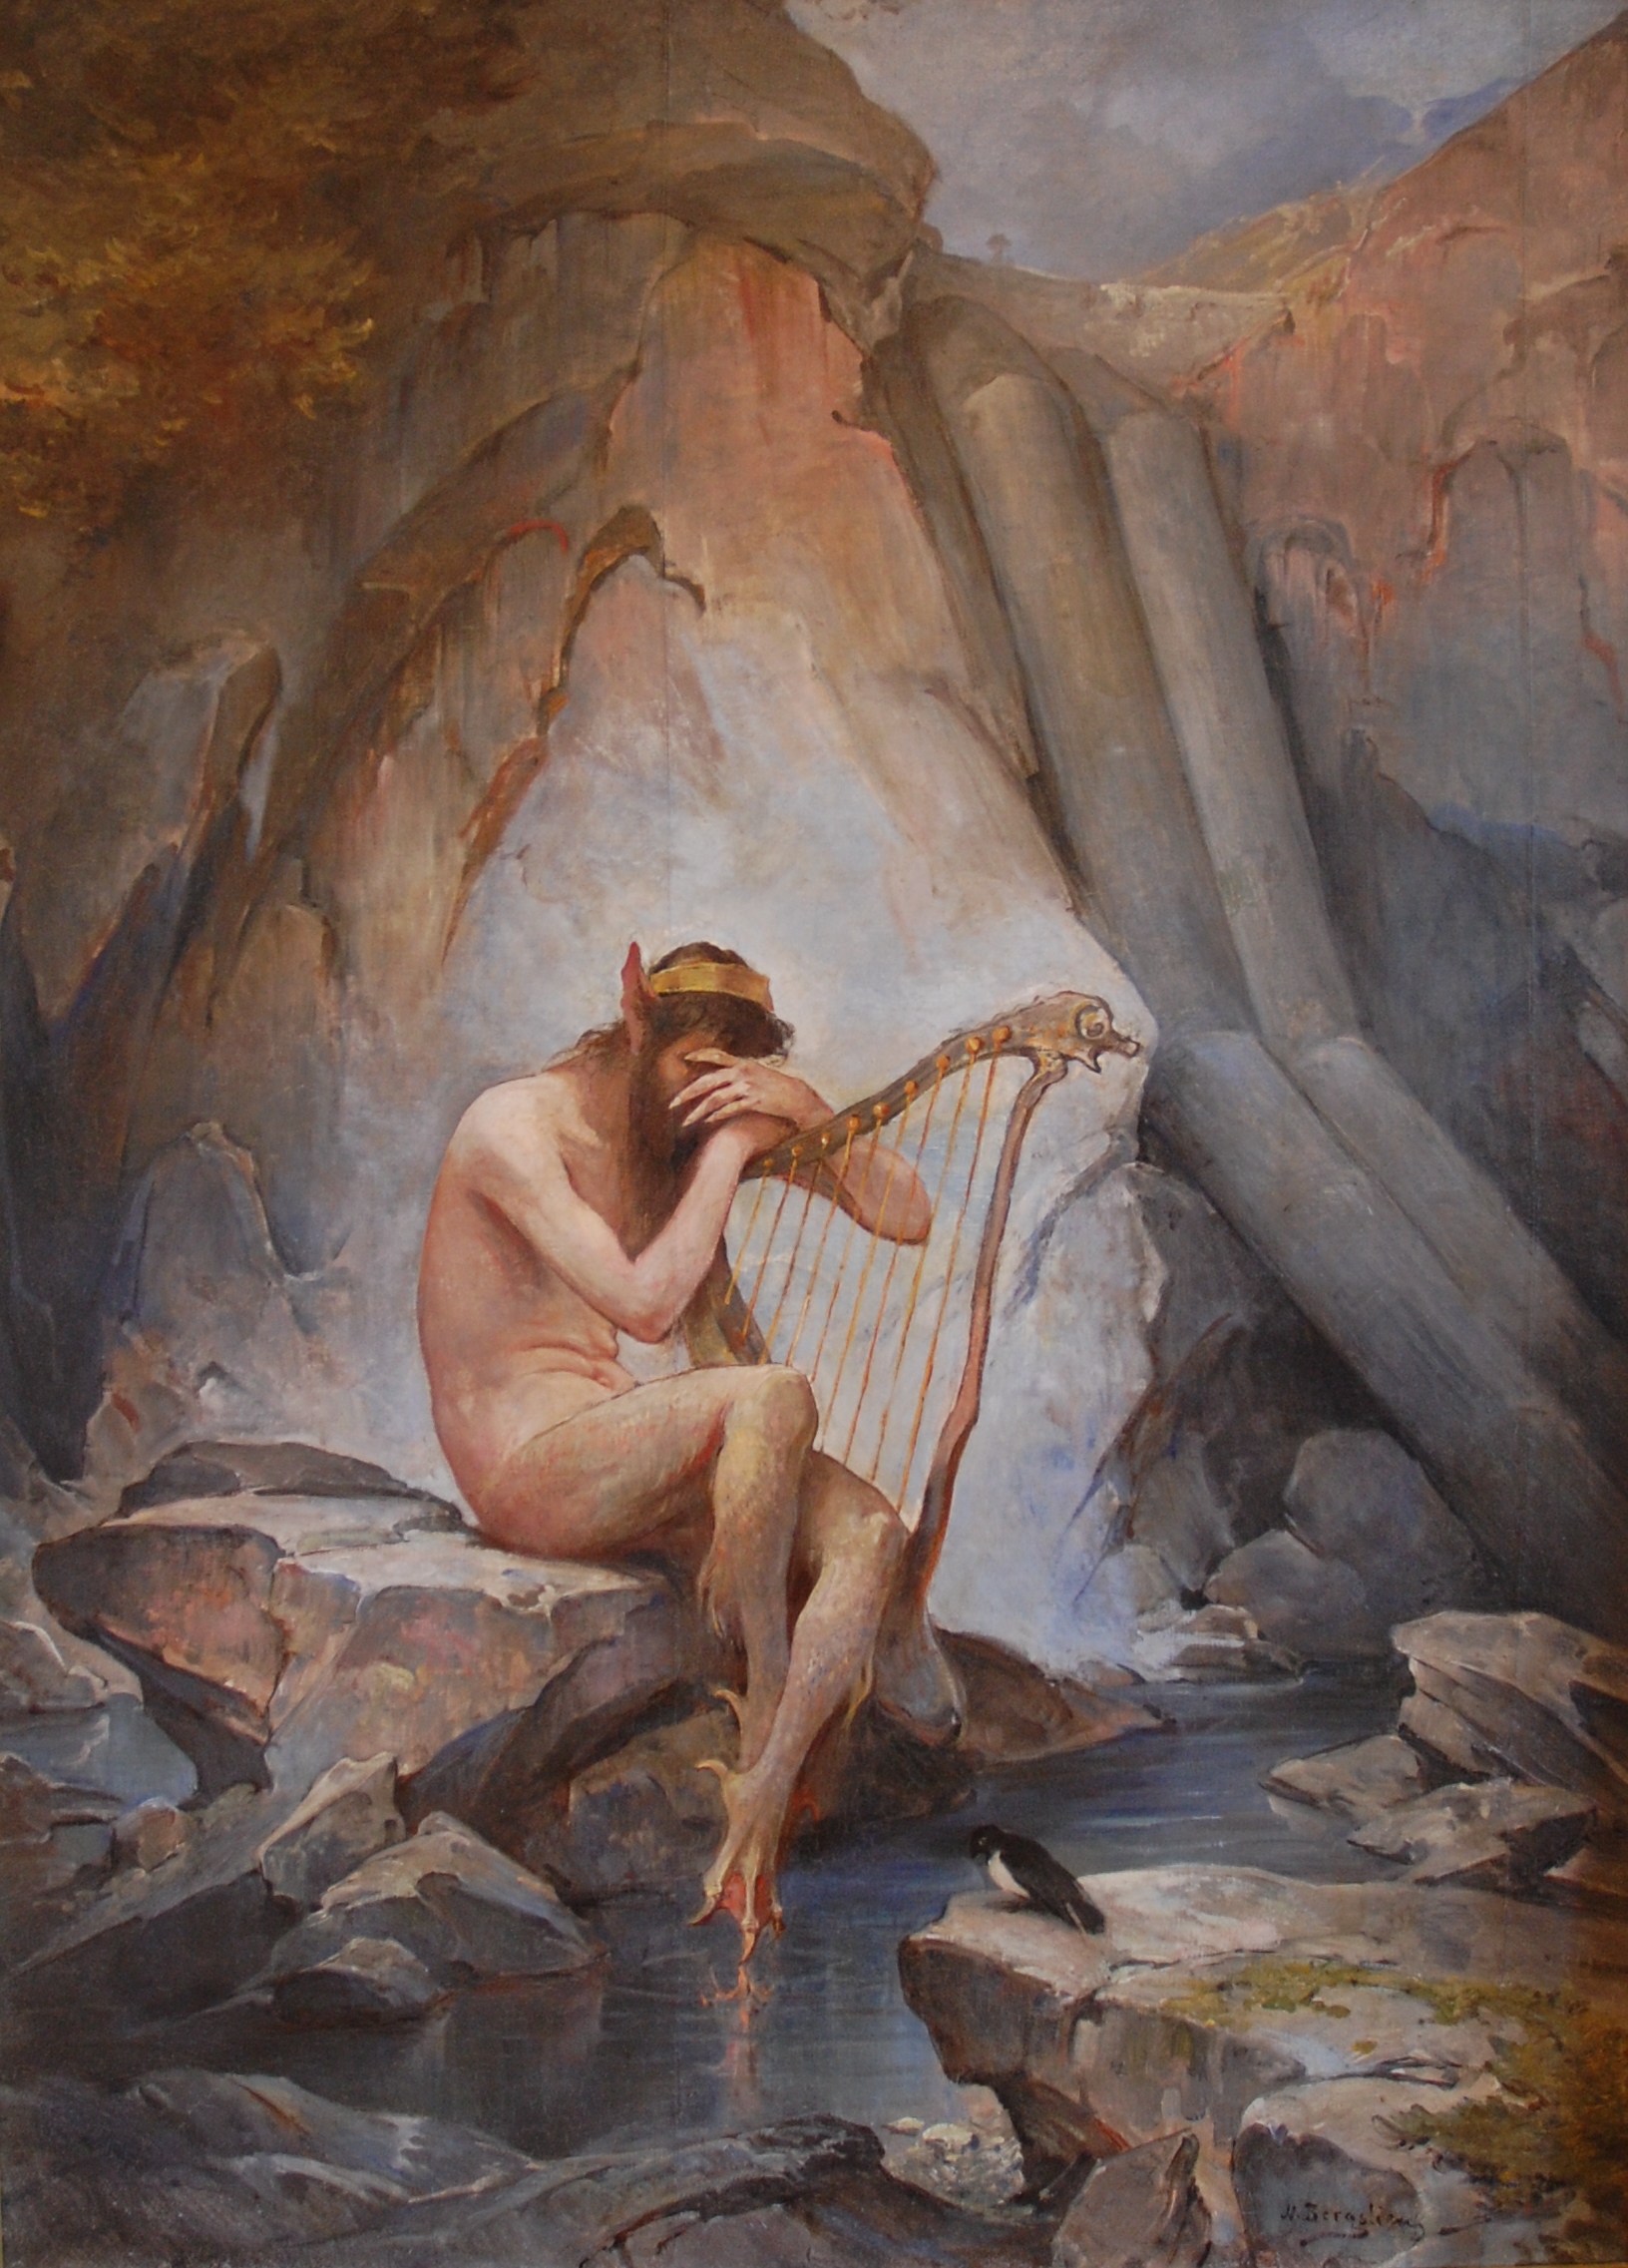 A male water spirit sitting by a river while resting his hands on a harp, covering his face